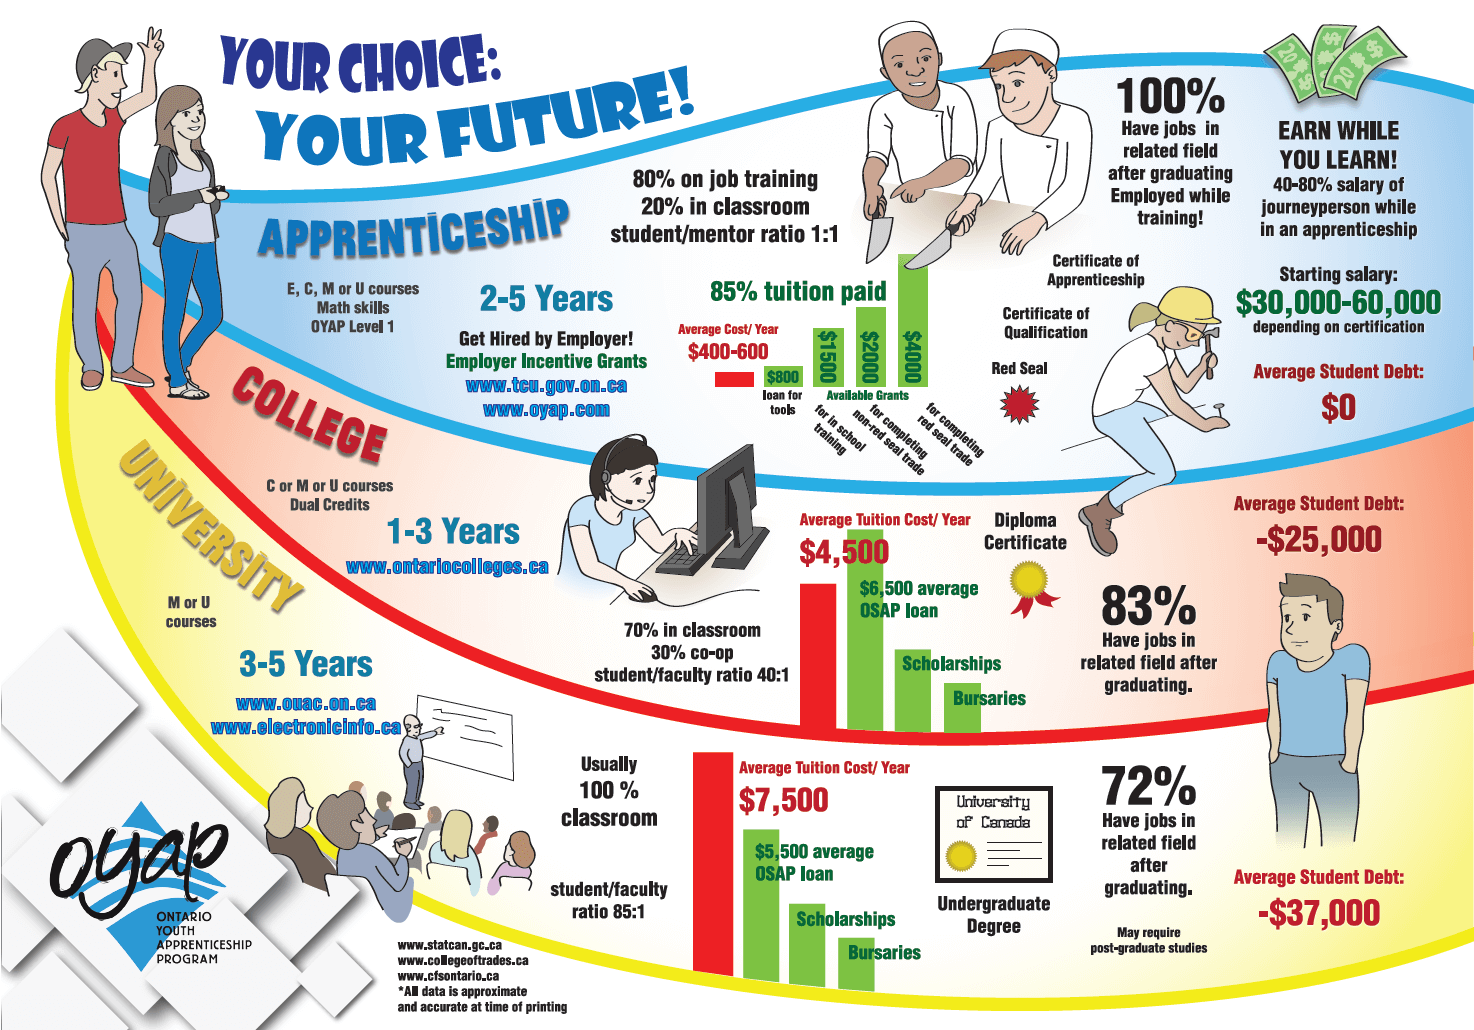 Your Choice Your Future graphic